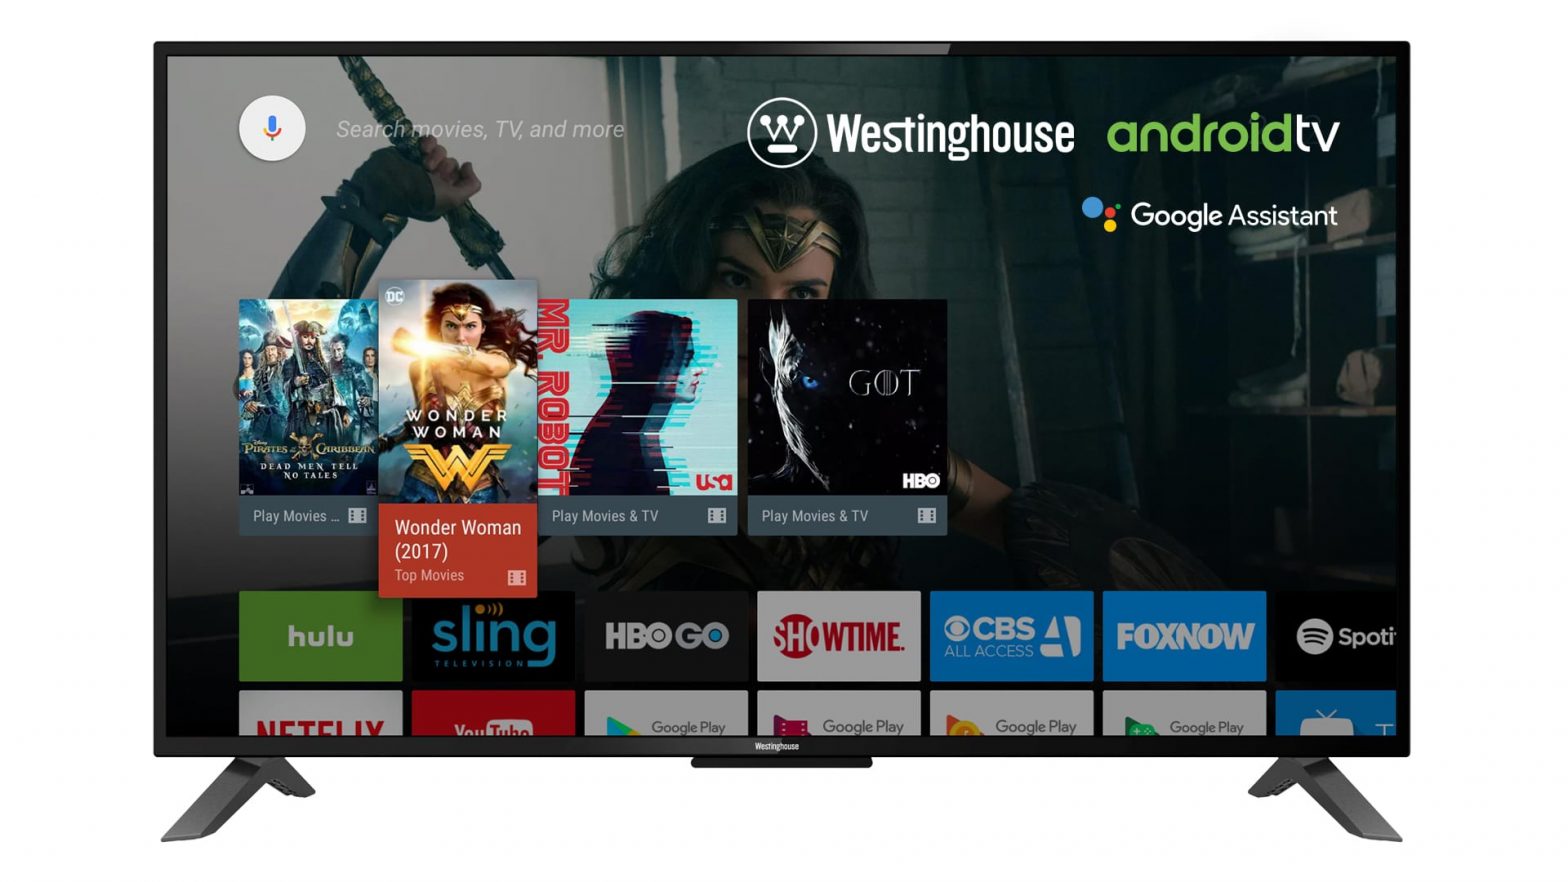 Westinghouse Android TV WG55UX4100 User Manual